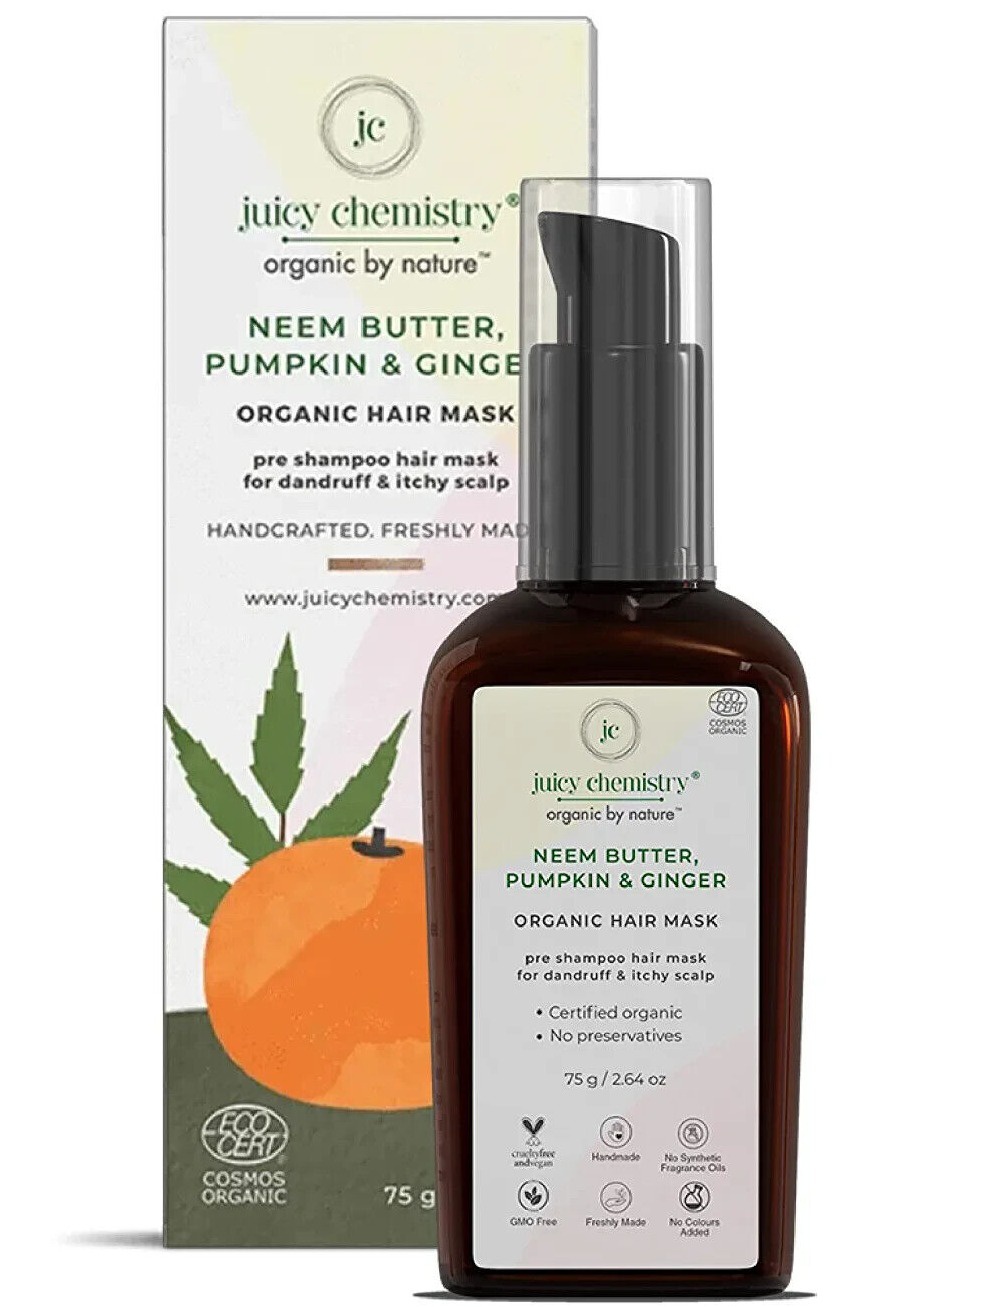 juicy chemistry Neem Butter, Pumpkin And Ginger Hair Mask